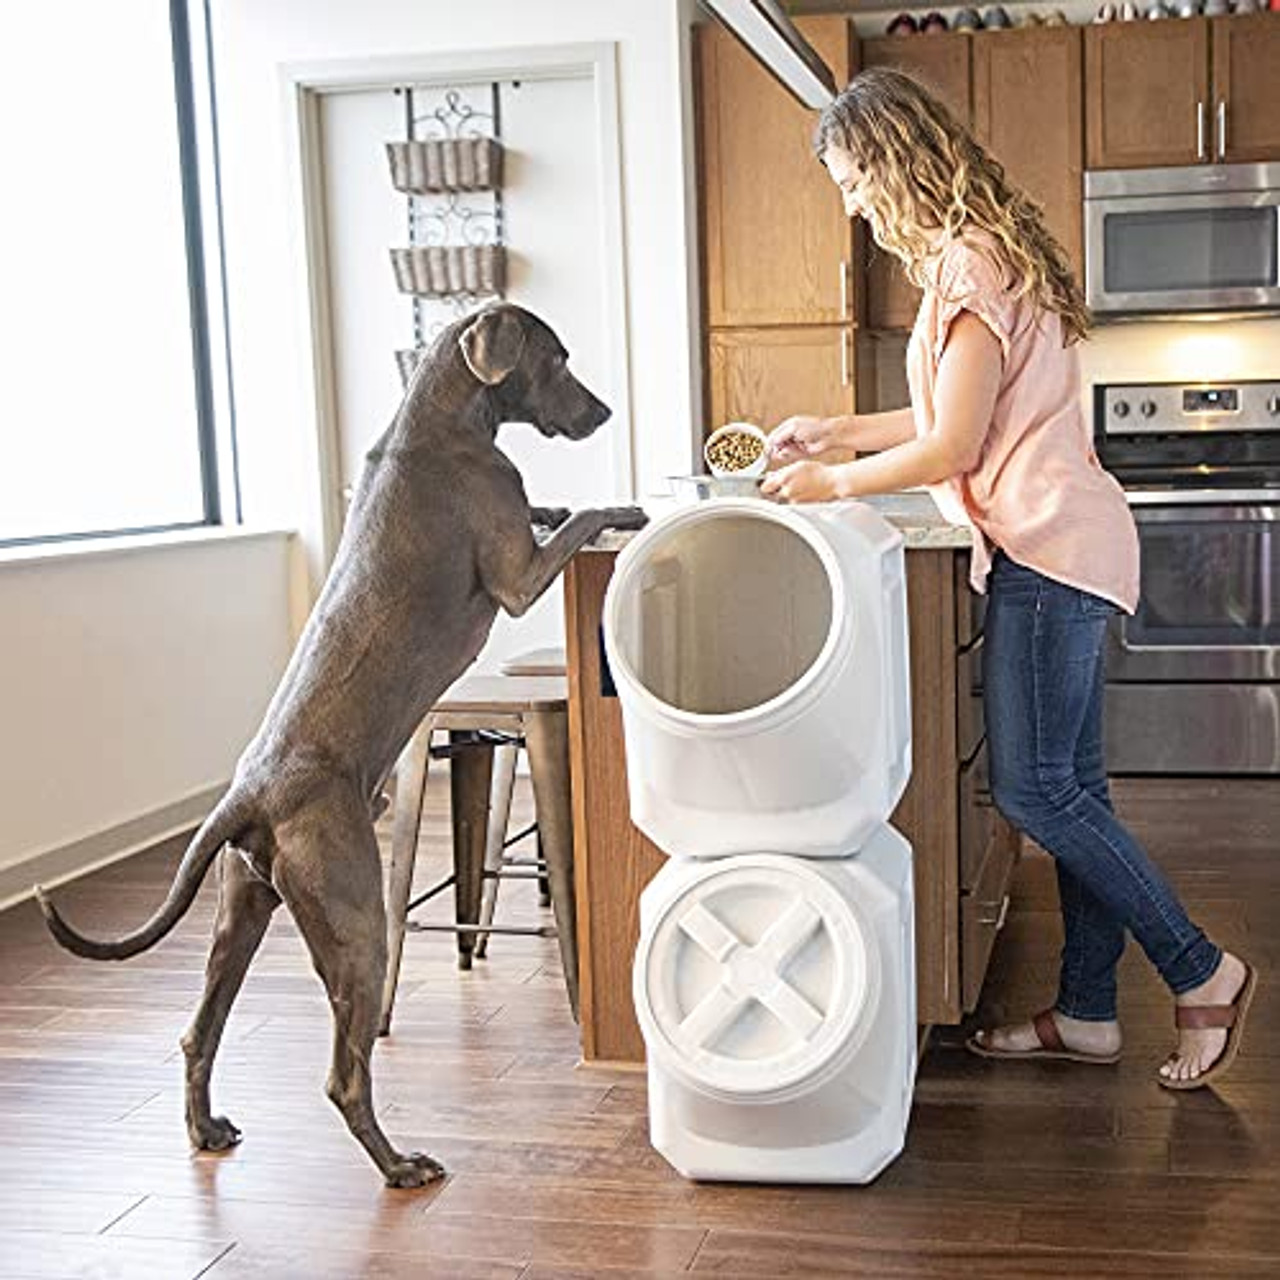 Pet Supplies : Gamma2 Vittles Vault Stackable Dog Food Storage Container,  Up to 40 Pounds Dry Pet Food Storage,Off-white, Made in USA : Pet Food  Storage Products 